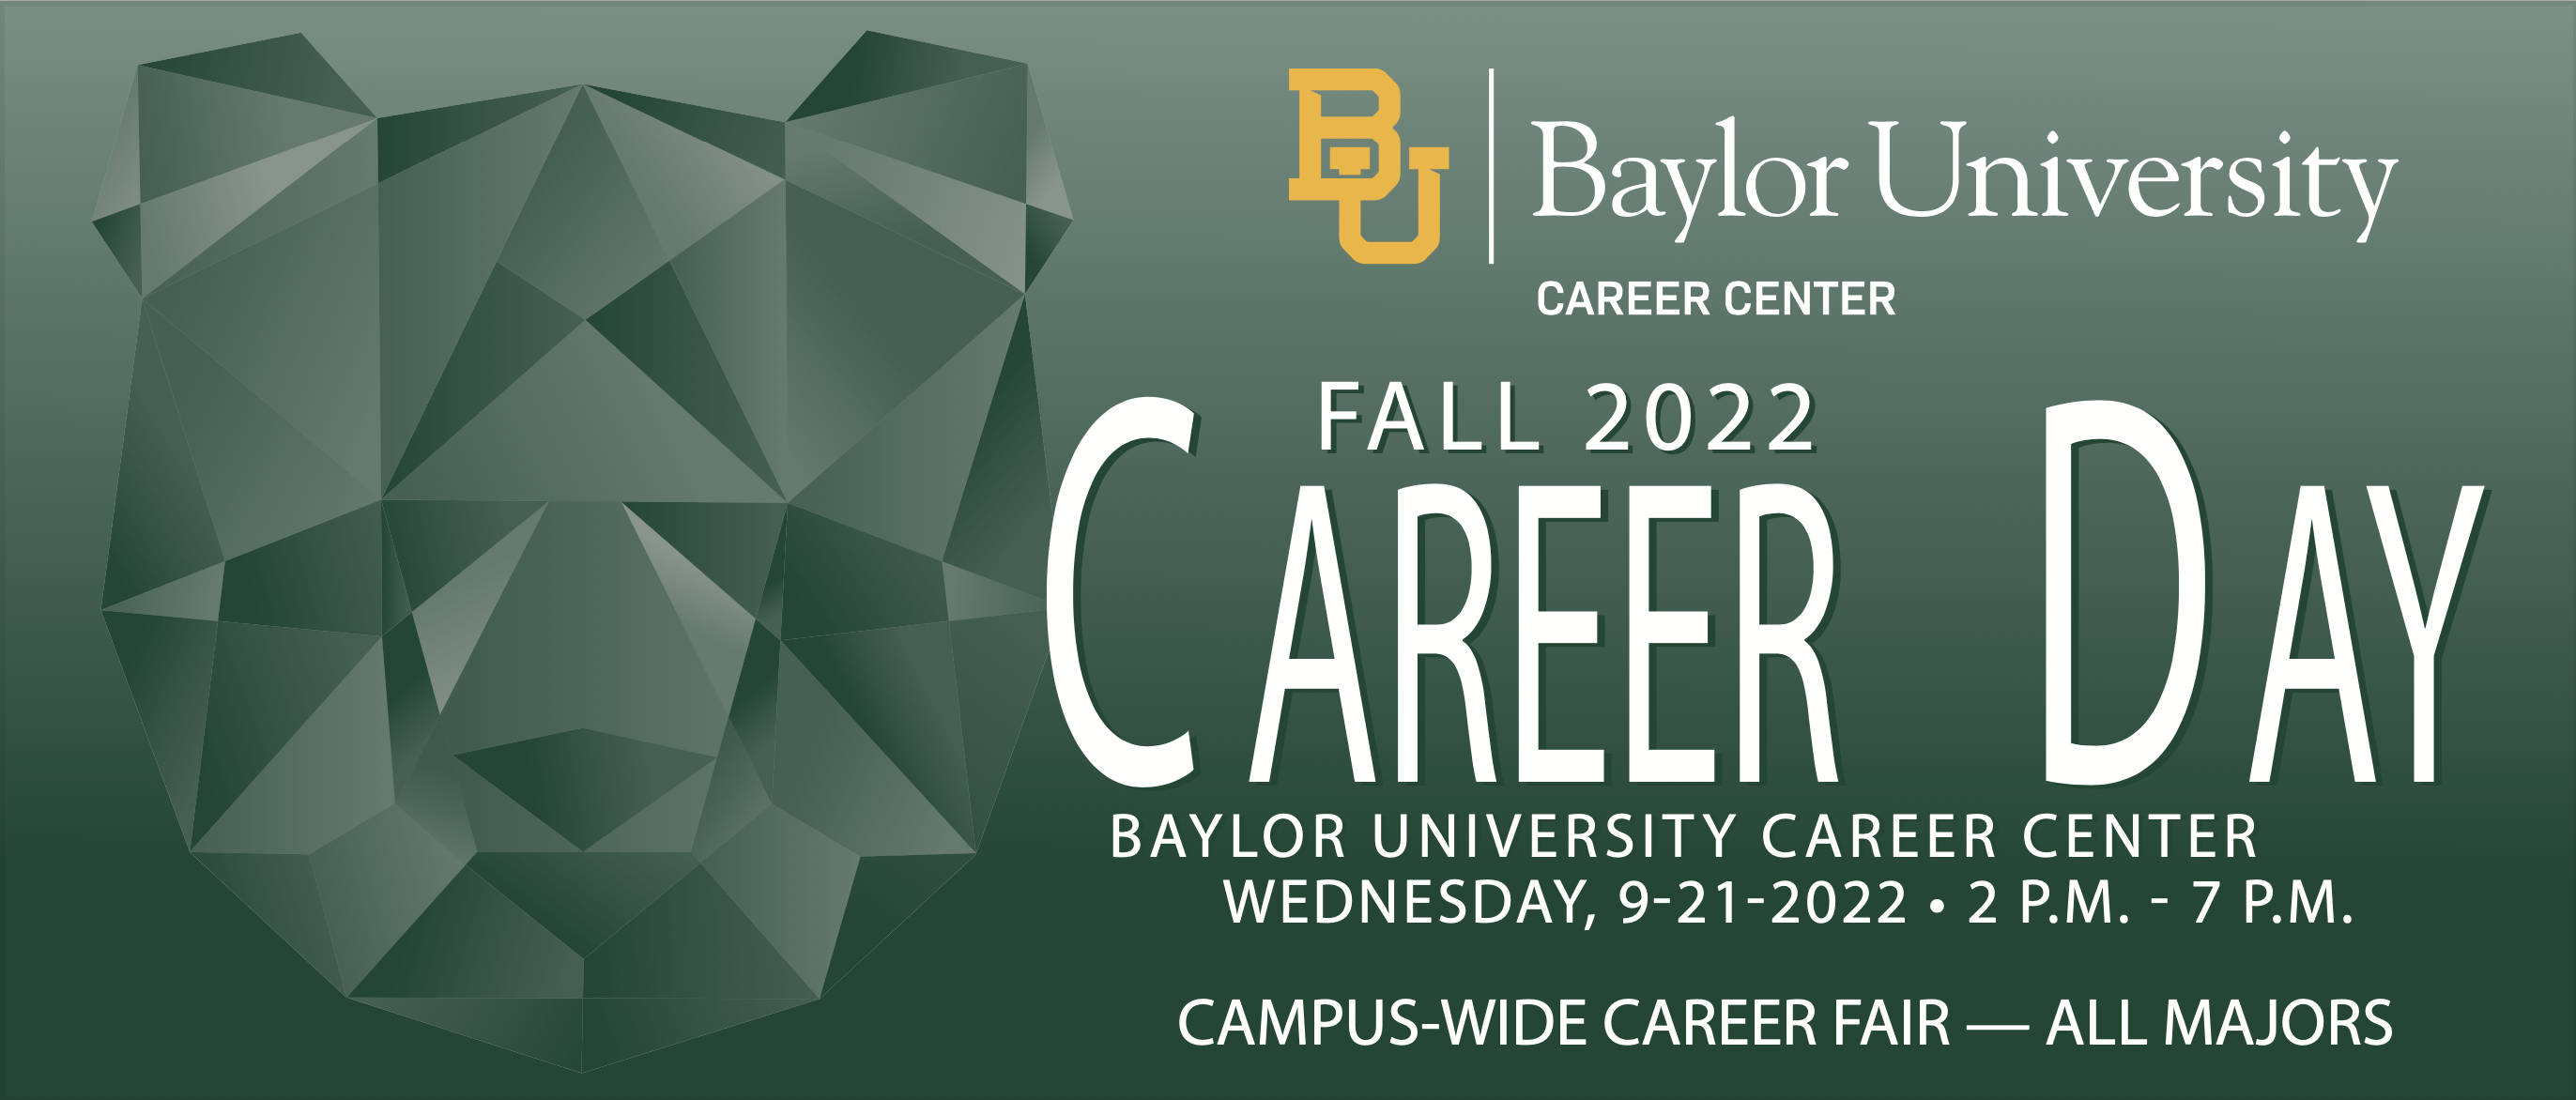 Baylor University Career Center presents Fall 2022 Career Day. Wednesday, September 21st 2022 from 2 pm to 7 pm. All majors